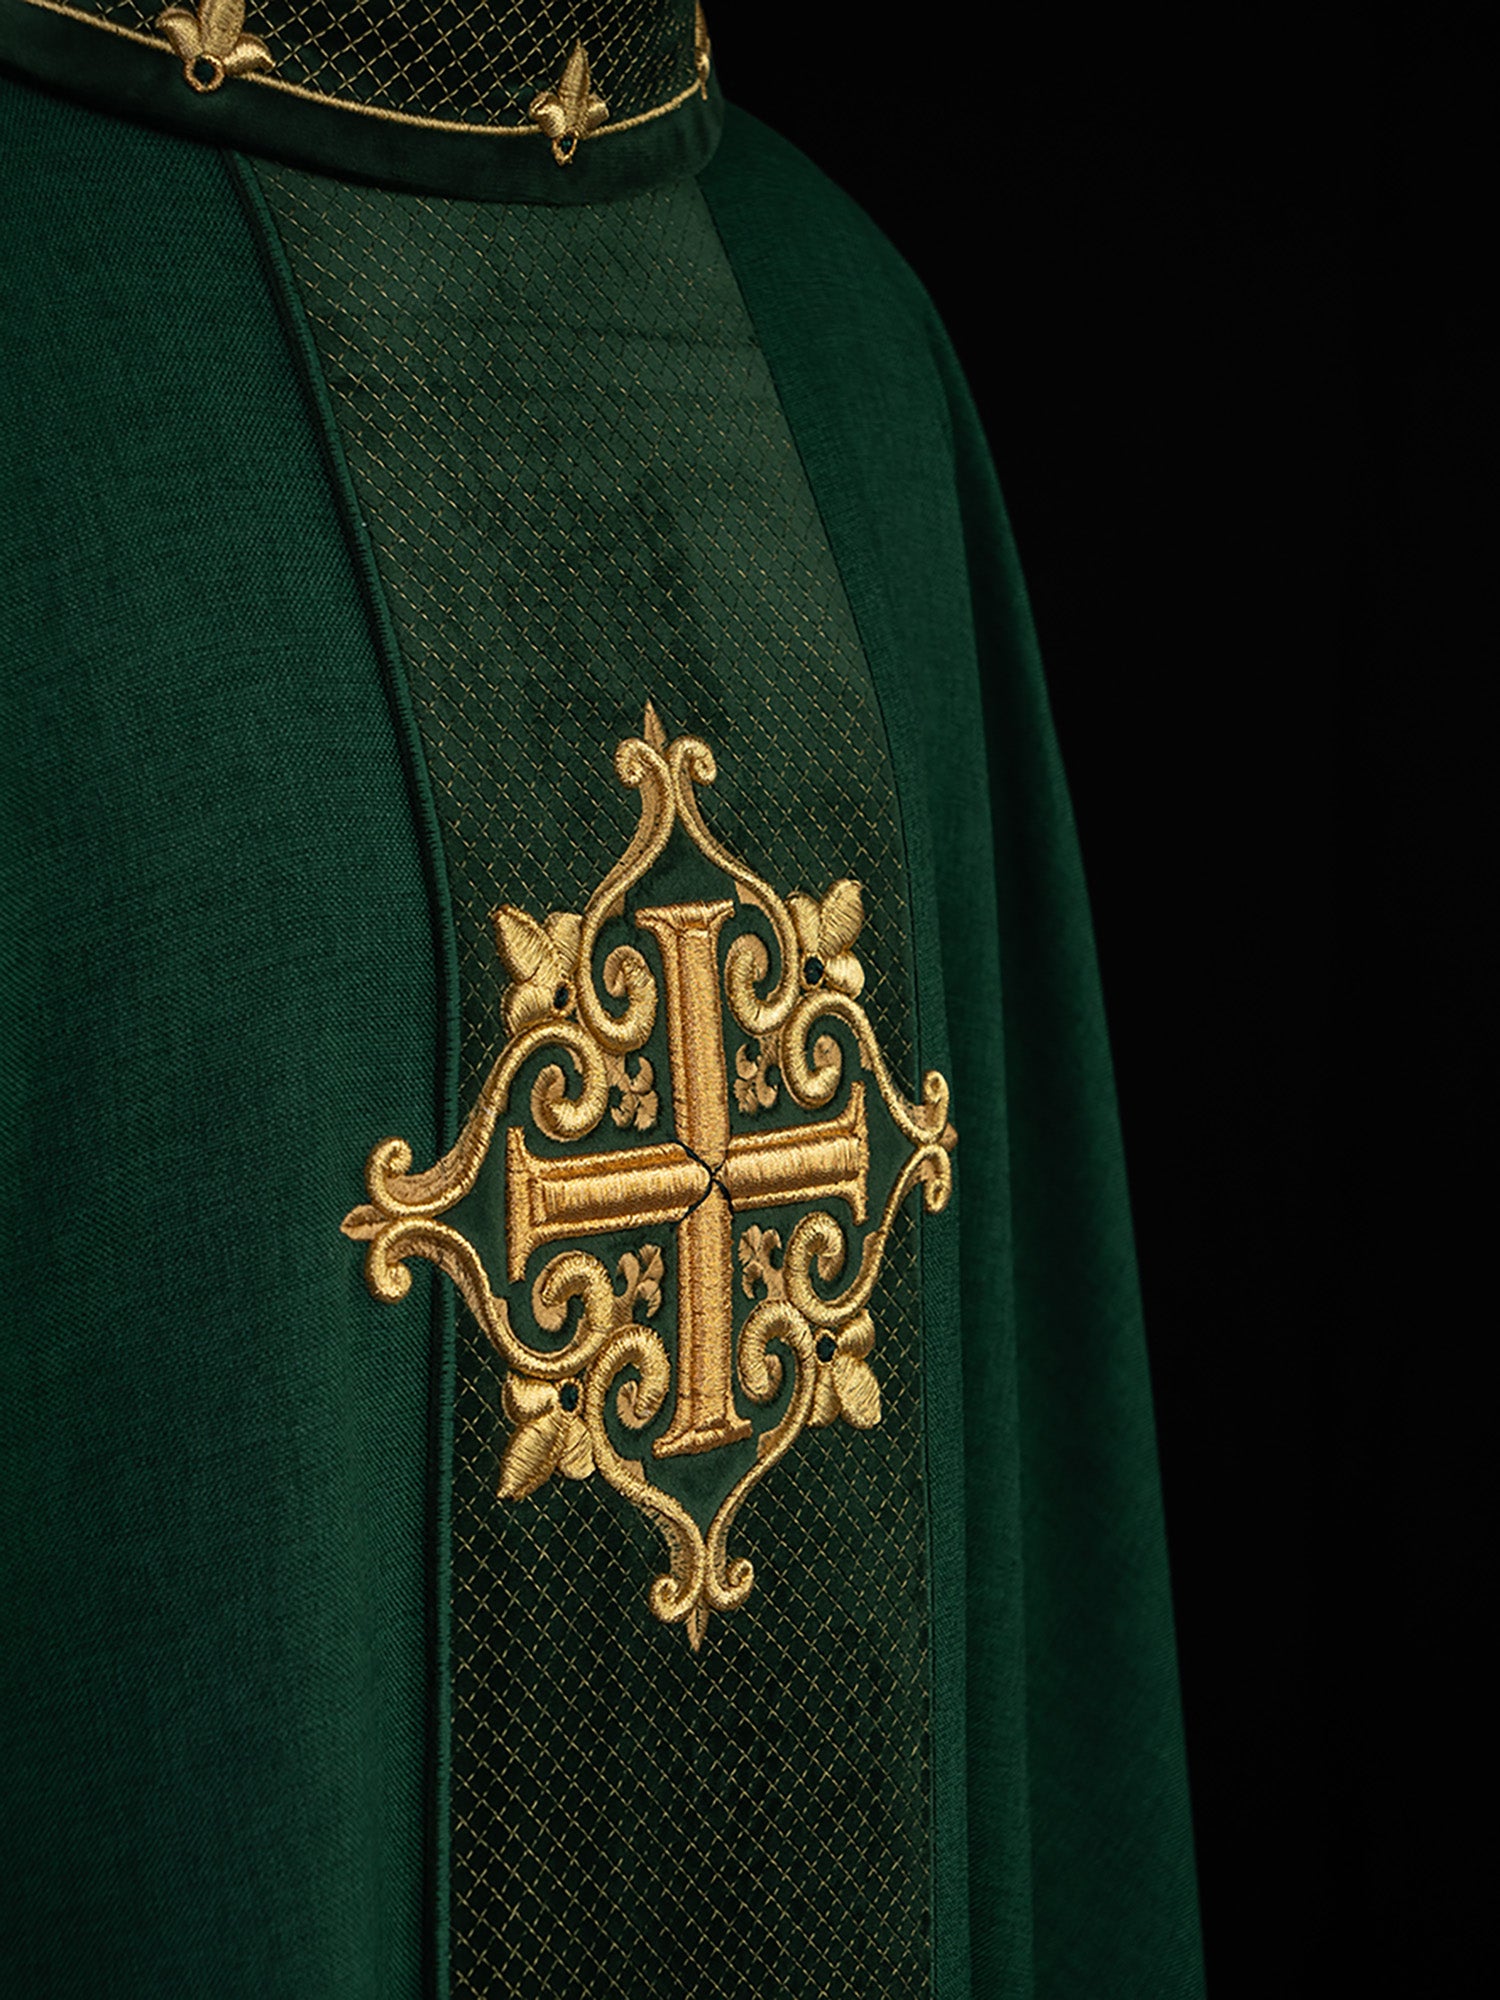 Chasuble or liturgical vestment?